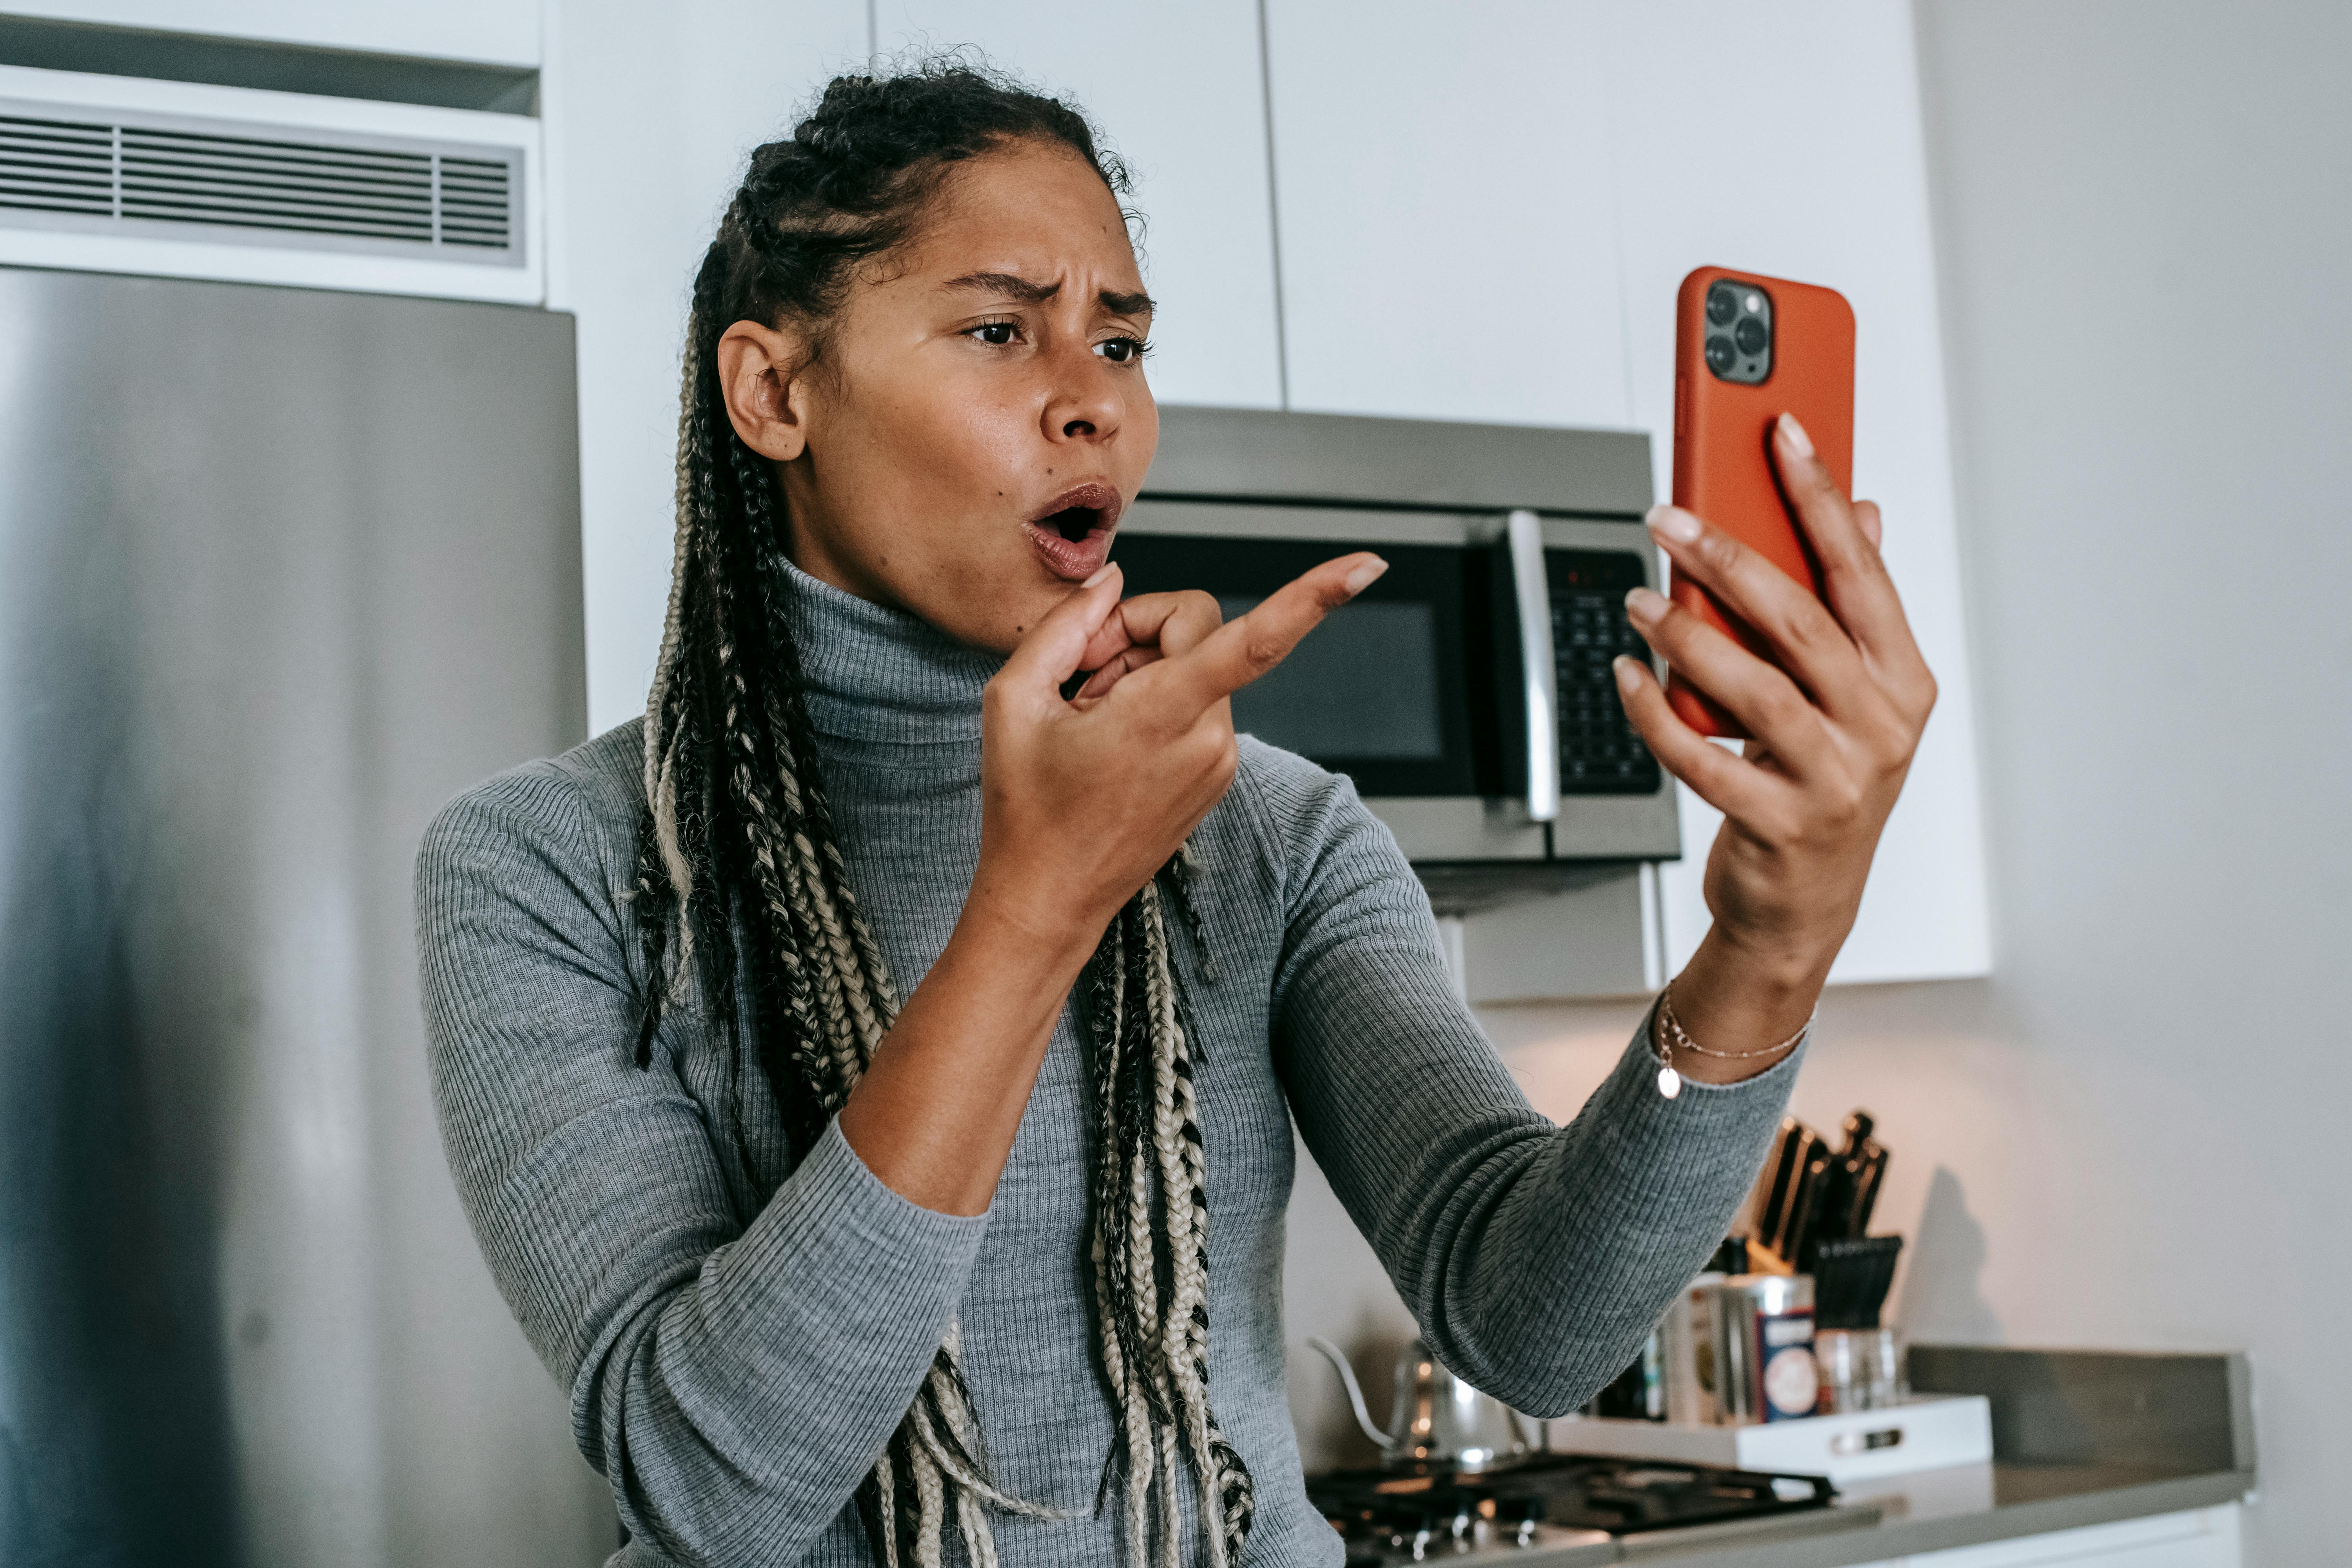 A stressed woman on her phone | Source: Pexels